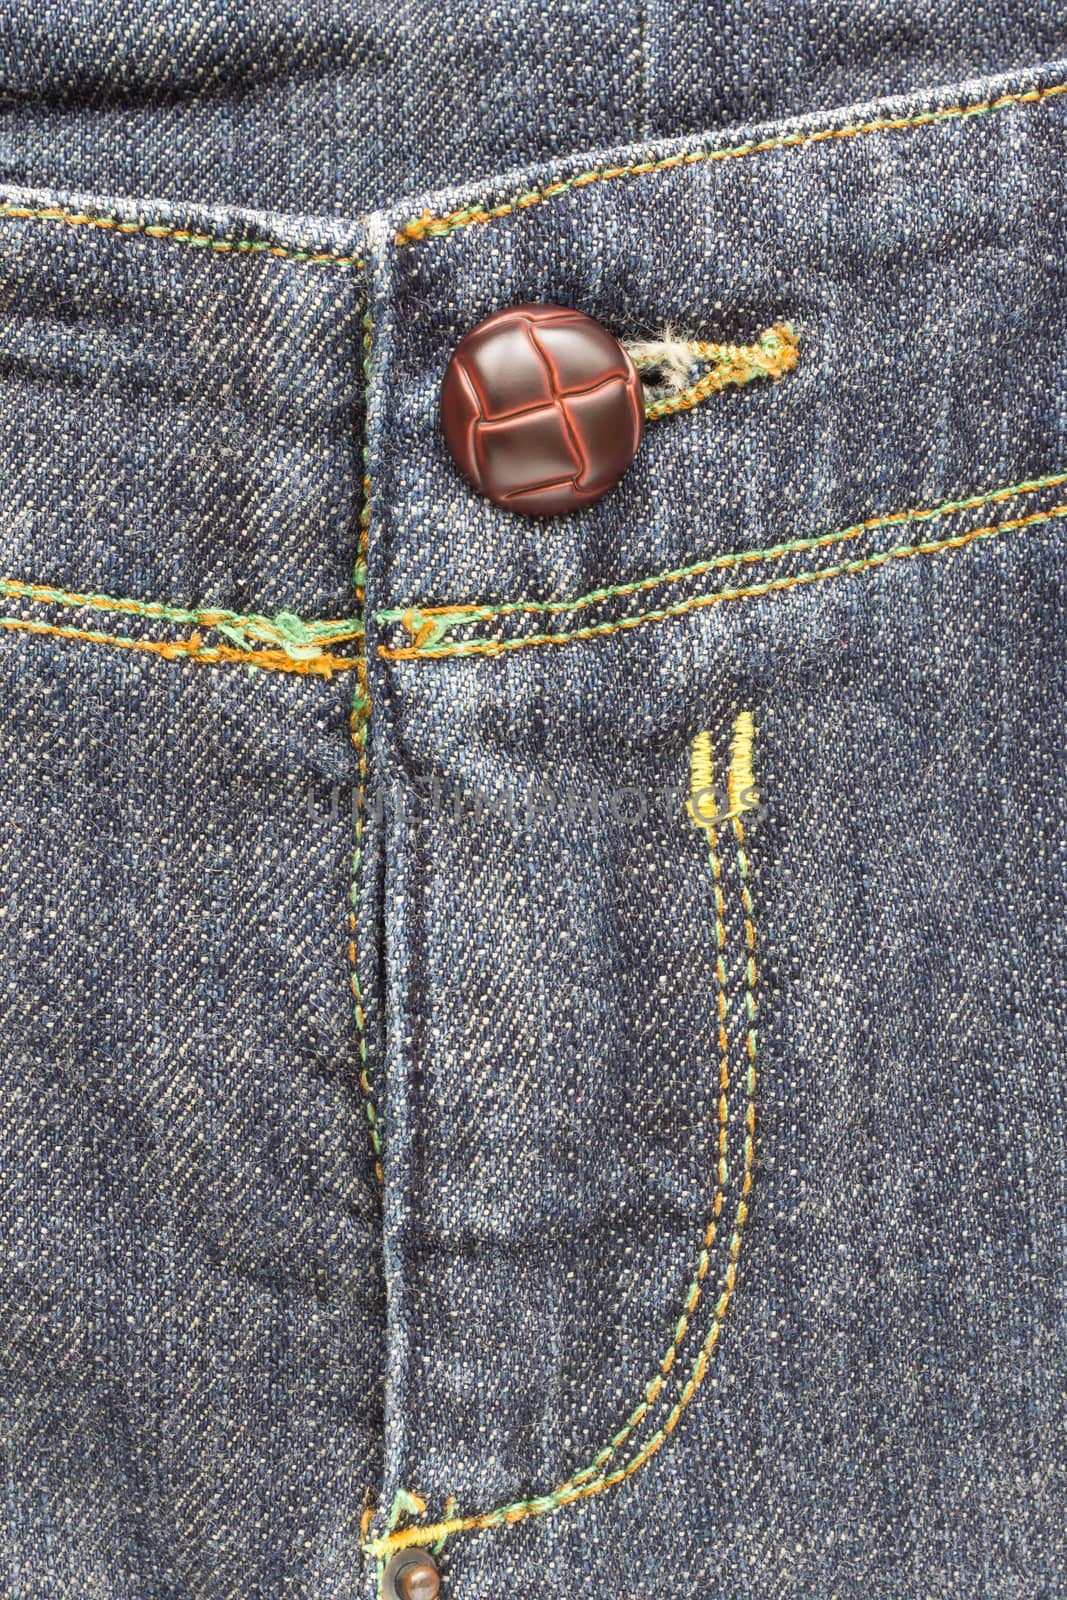 Crotch Jeans Texture Background and Brown Button. Crotch Jeans Background and Brown Button for Apparel Design